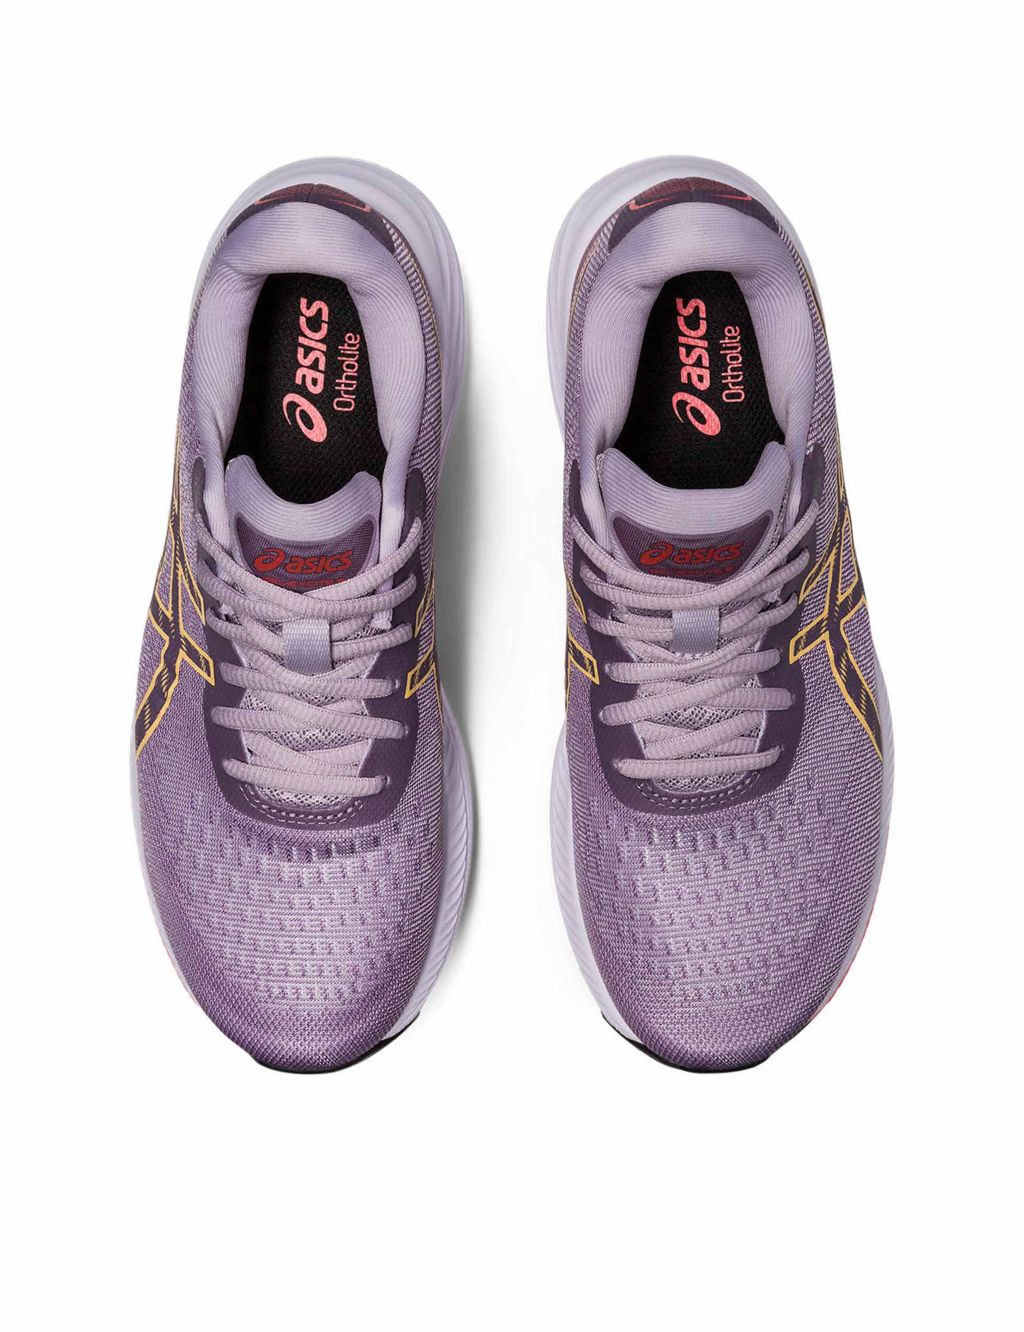 GEL™- Excite 9 Trainers image 3